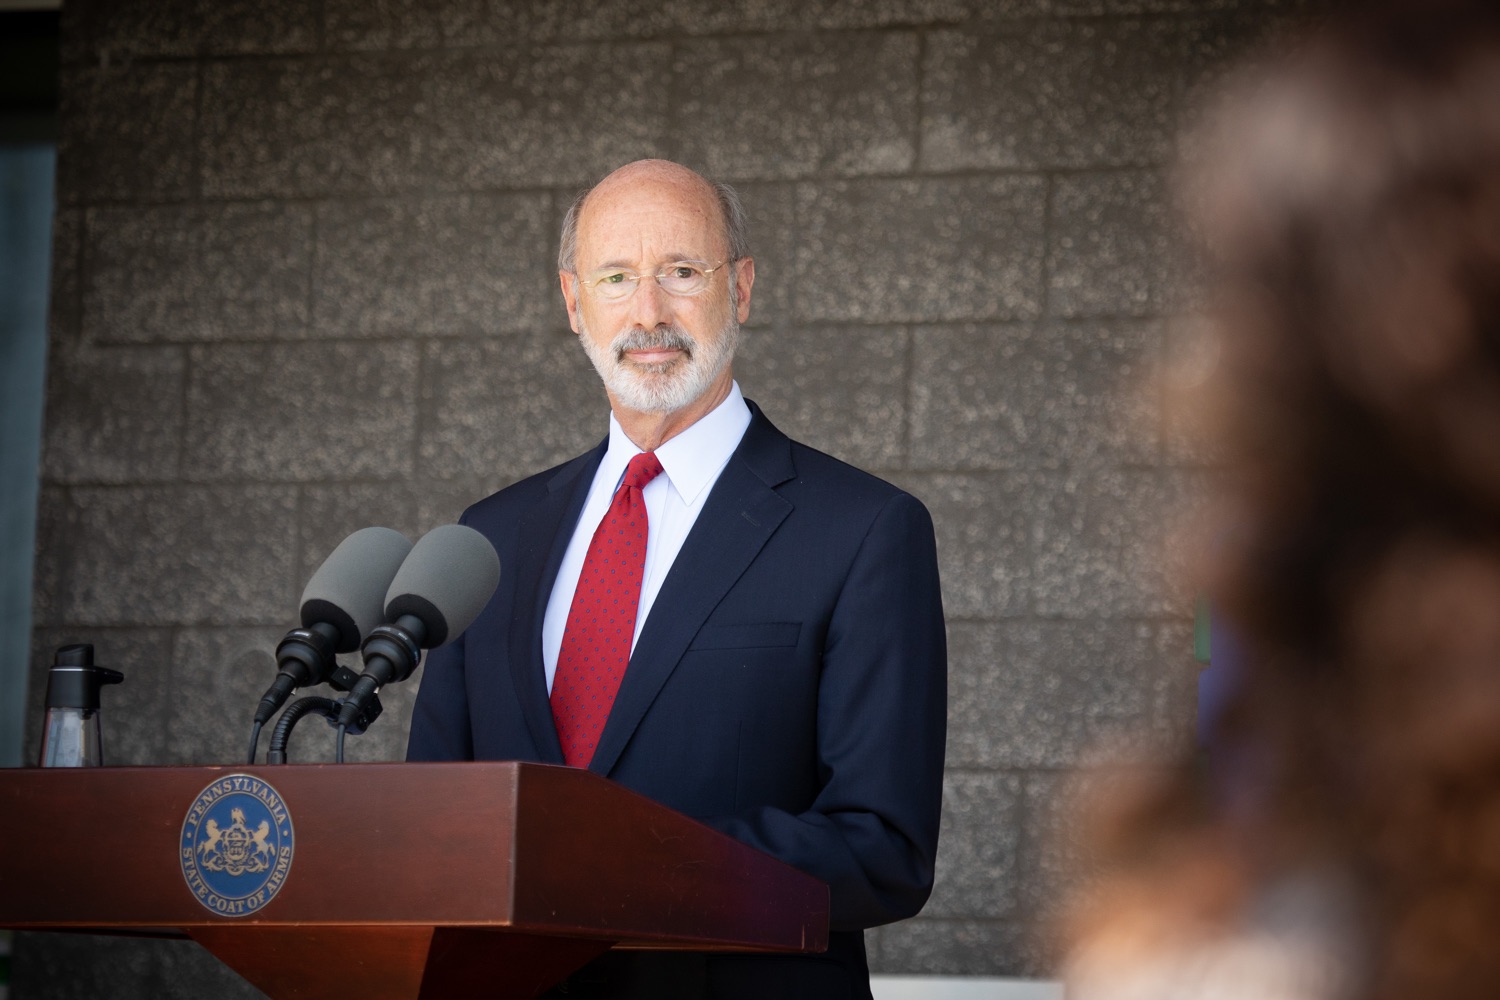 Pennsylvania Governor Tom Wolf speaking with the press.  Governor Tom Wolf visited the child care center at PSECU headquarters in Harrisburg today to announce $53 million in additional financial support for child care providers that have suffered during COVID-19.  Harrisburg, PA  July 6, 2020..<br><a href="https://filesource.amperwave.net/commonwealthofpa/photo/18143_gov_cares_dz_01.jpg" target="_blank">⇣ Download Photo</a>